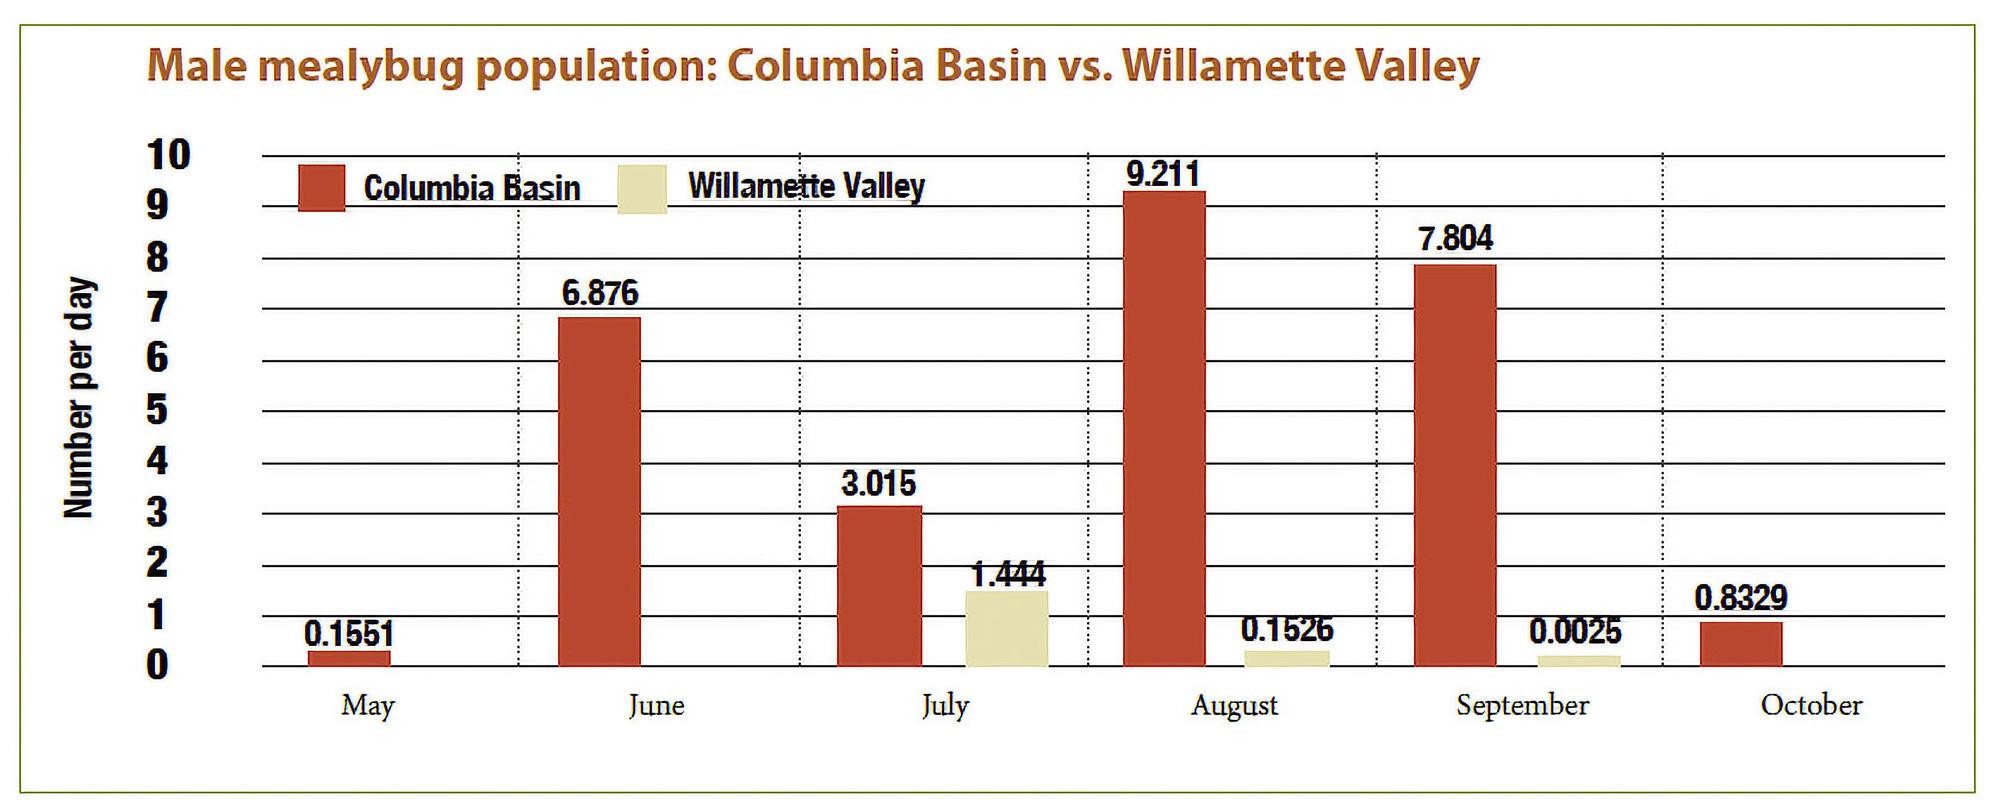 Chart comparing mealybug populations in Columbia Basin and the Willamette Valley.